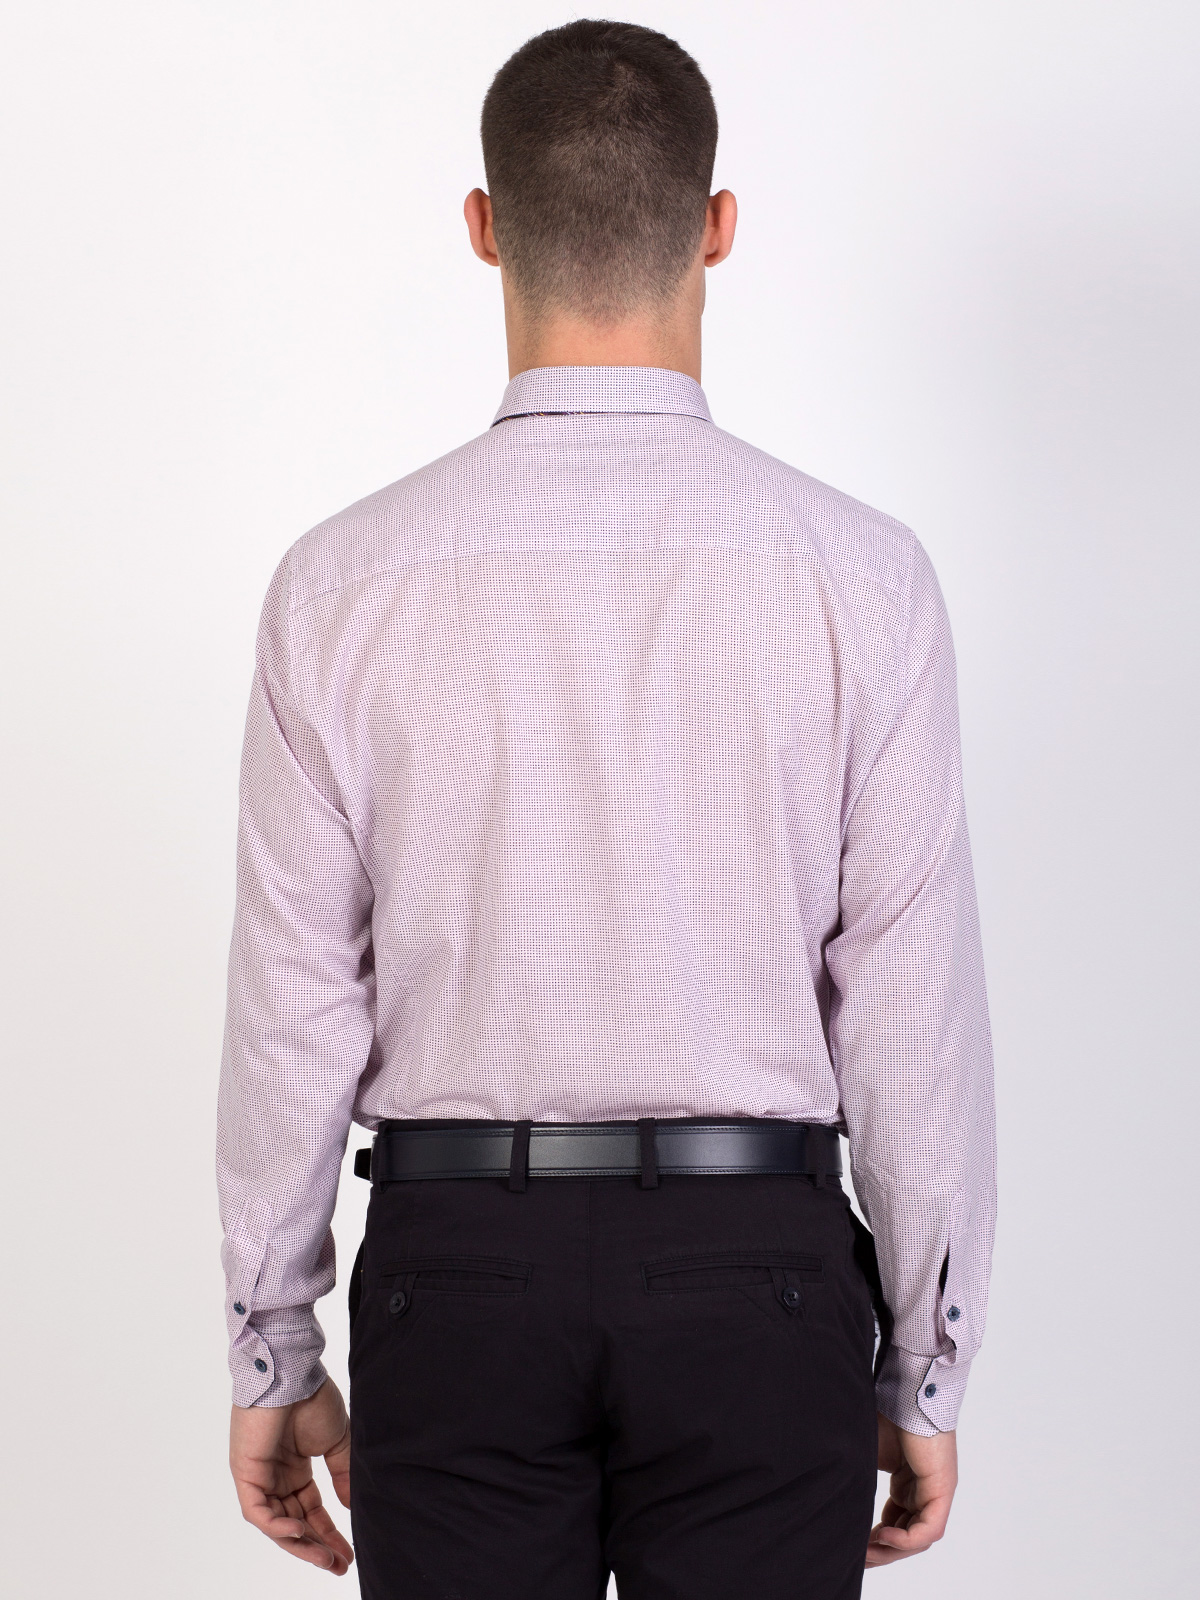 Fitted shirt in pink for small figures - 21455 € 27.00 img3